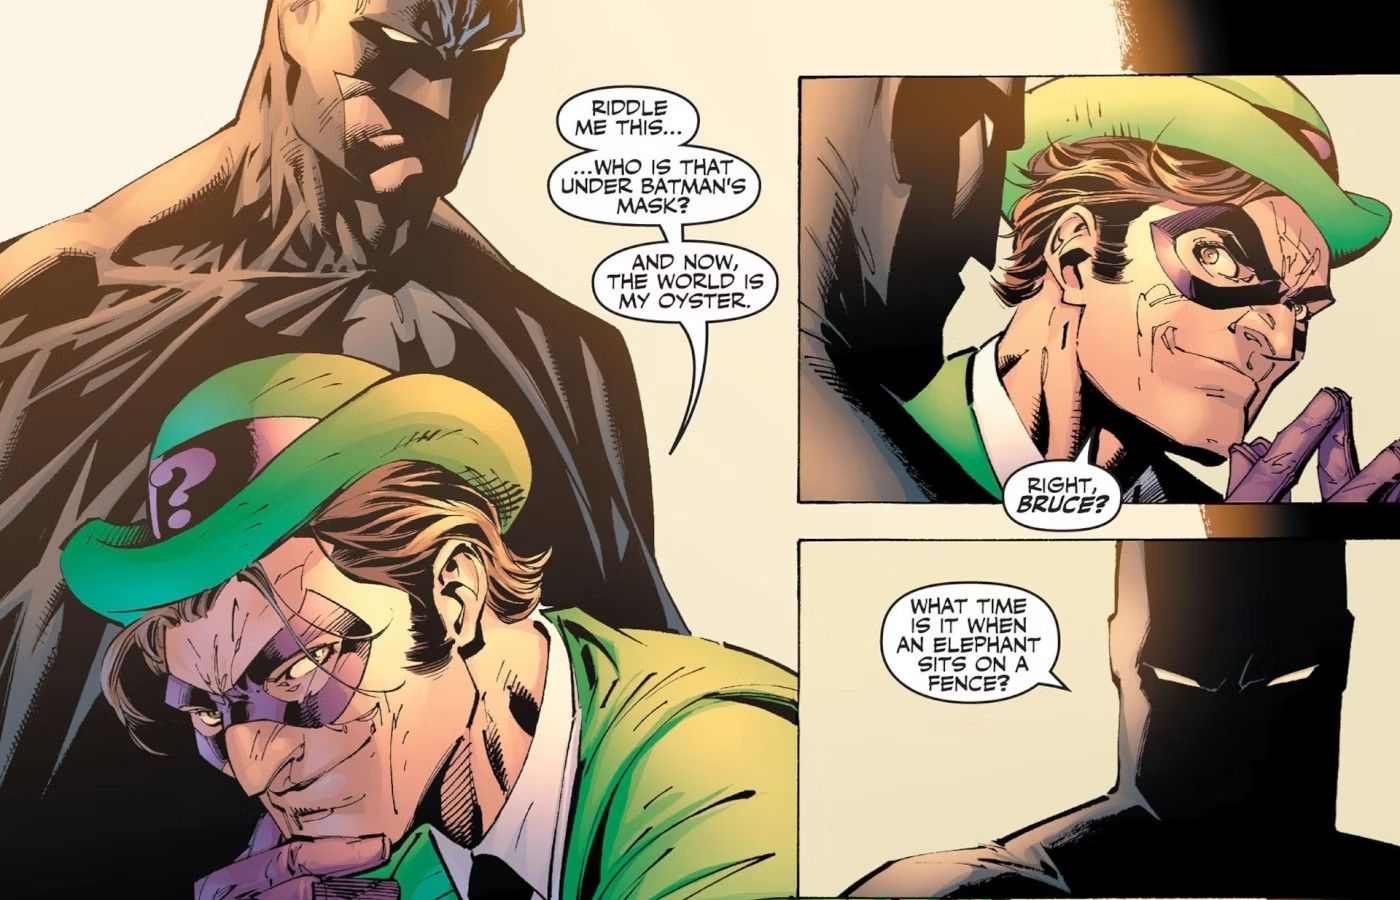 Comic book panels: the Riddler admits to Batman that he knows he's Bruce Wayne.